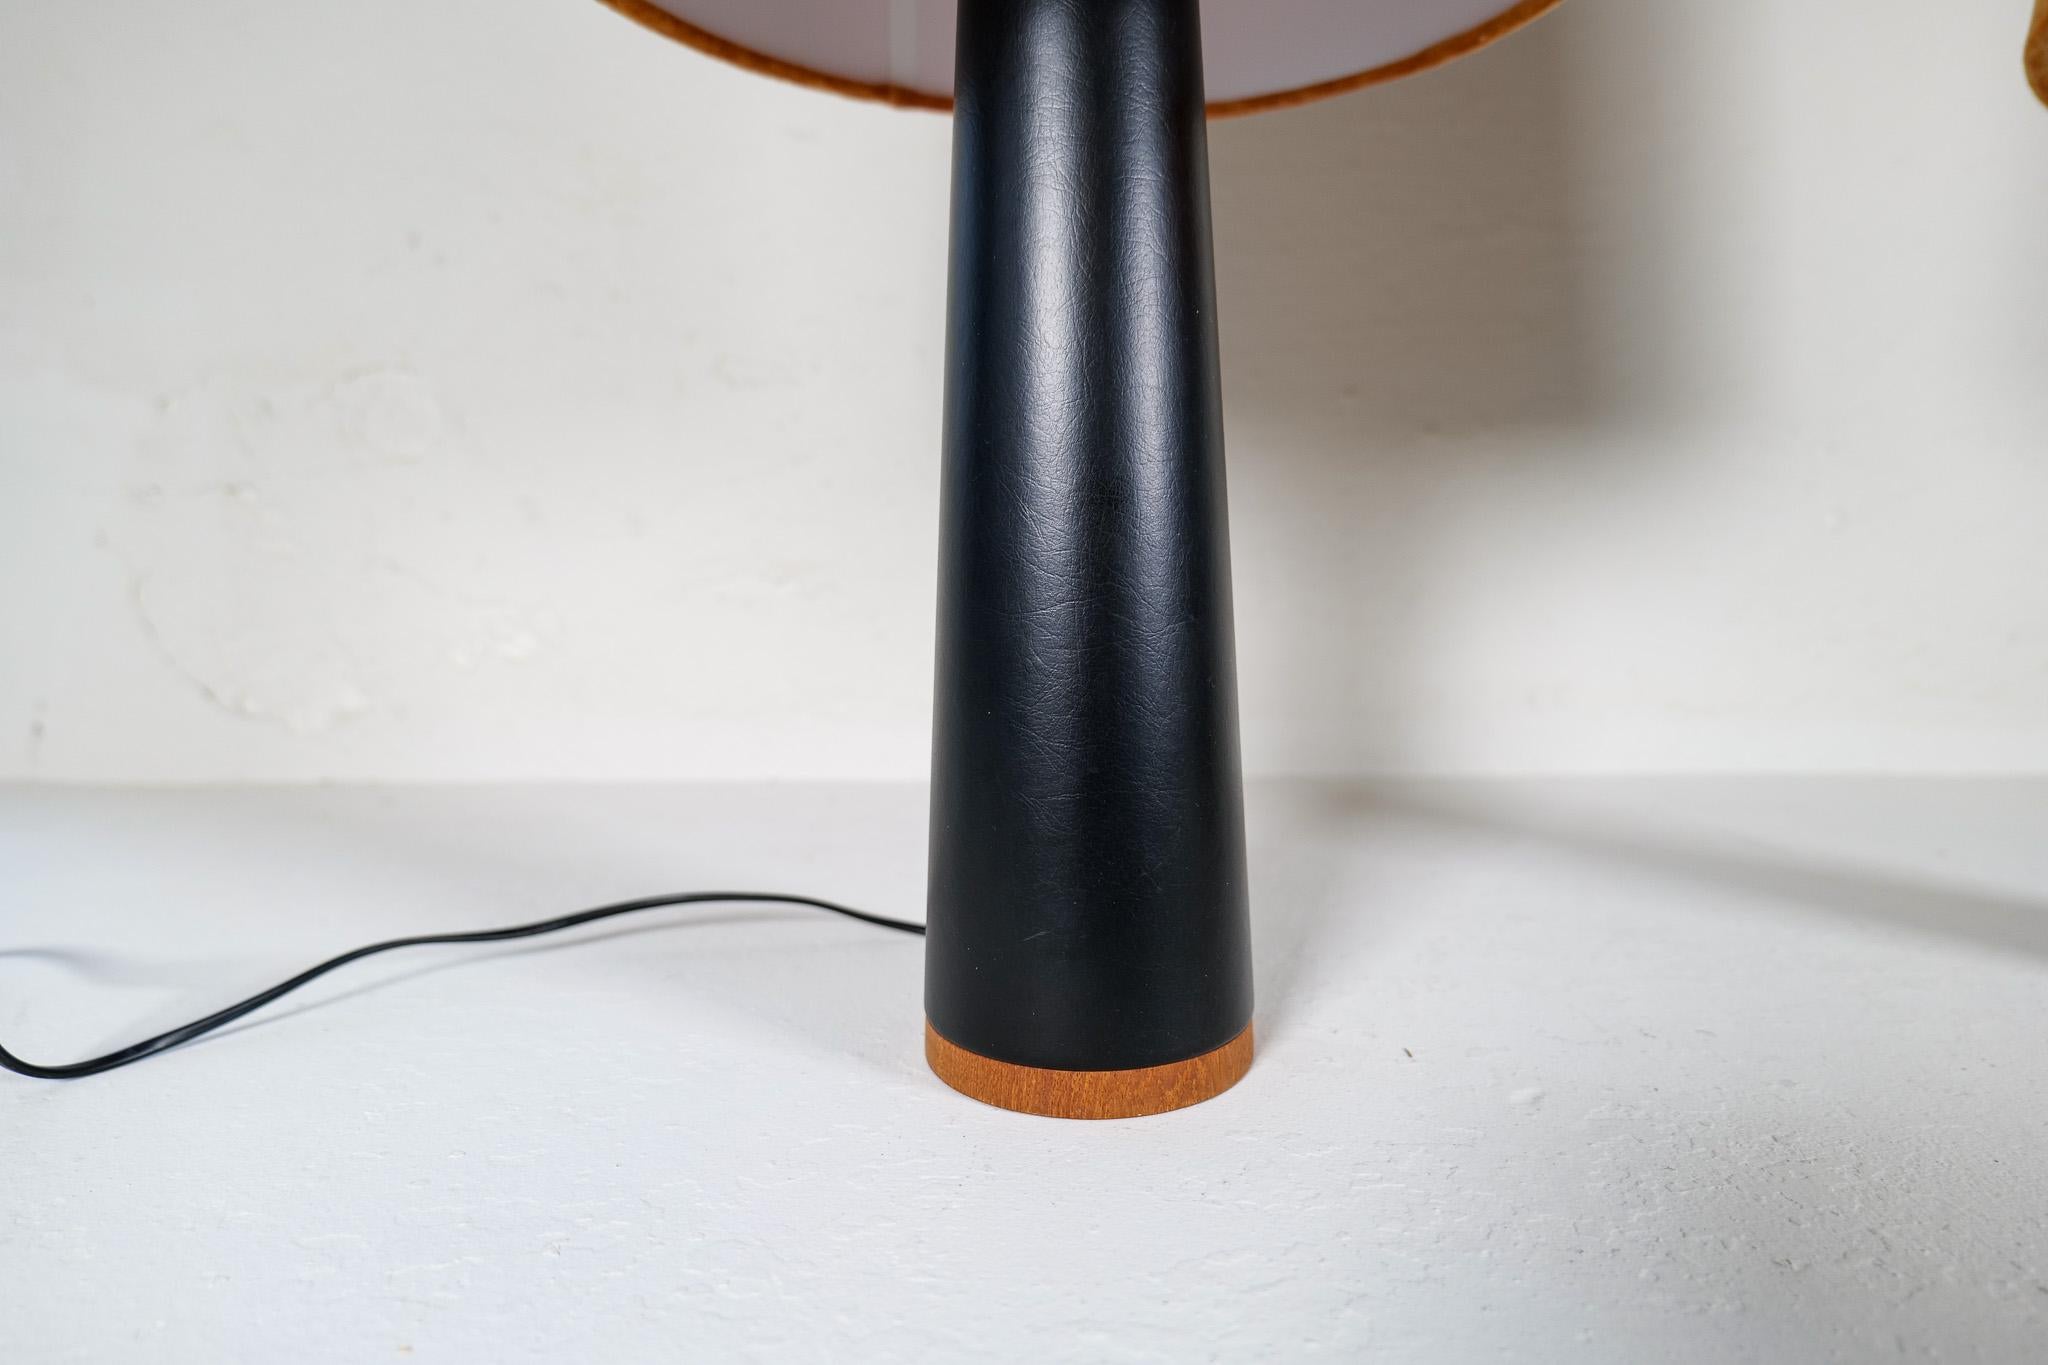 Faux Leather Scandinavian Modern Pair of Table Lamps Luxus, Sweden, 1970s For Sale